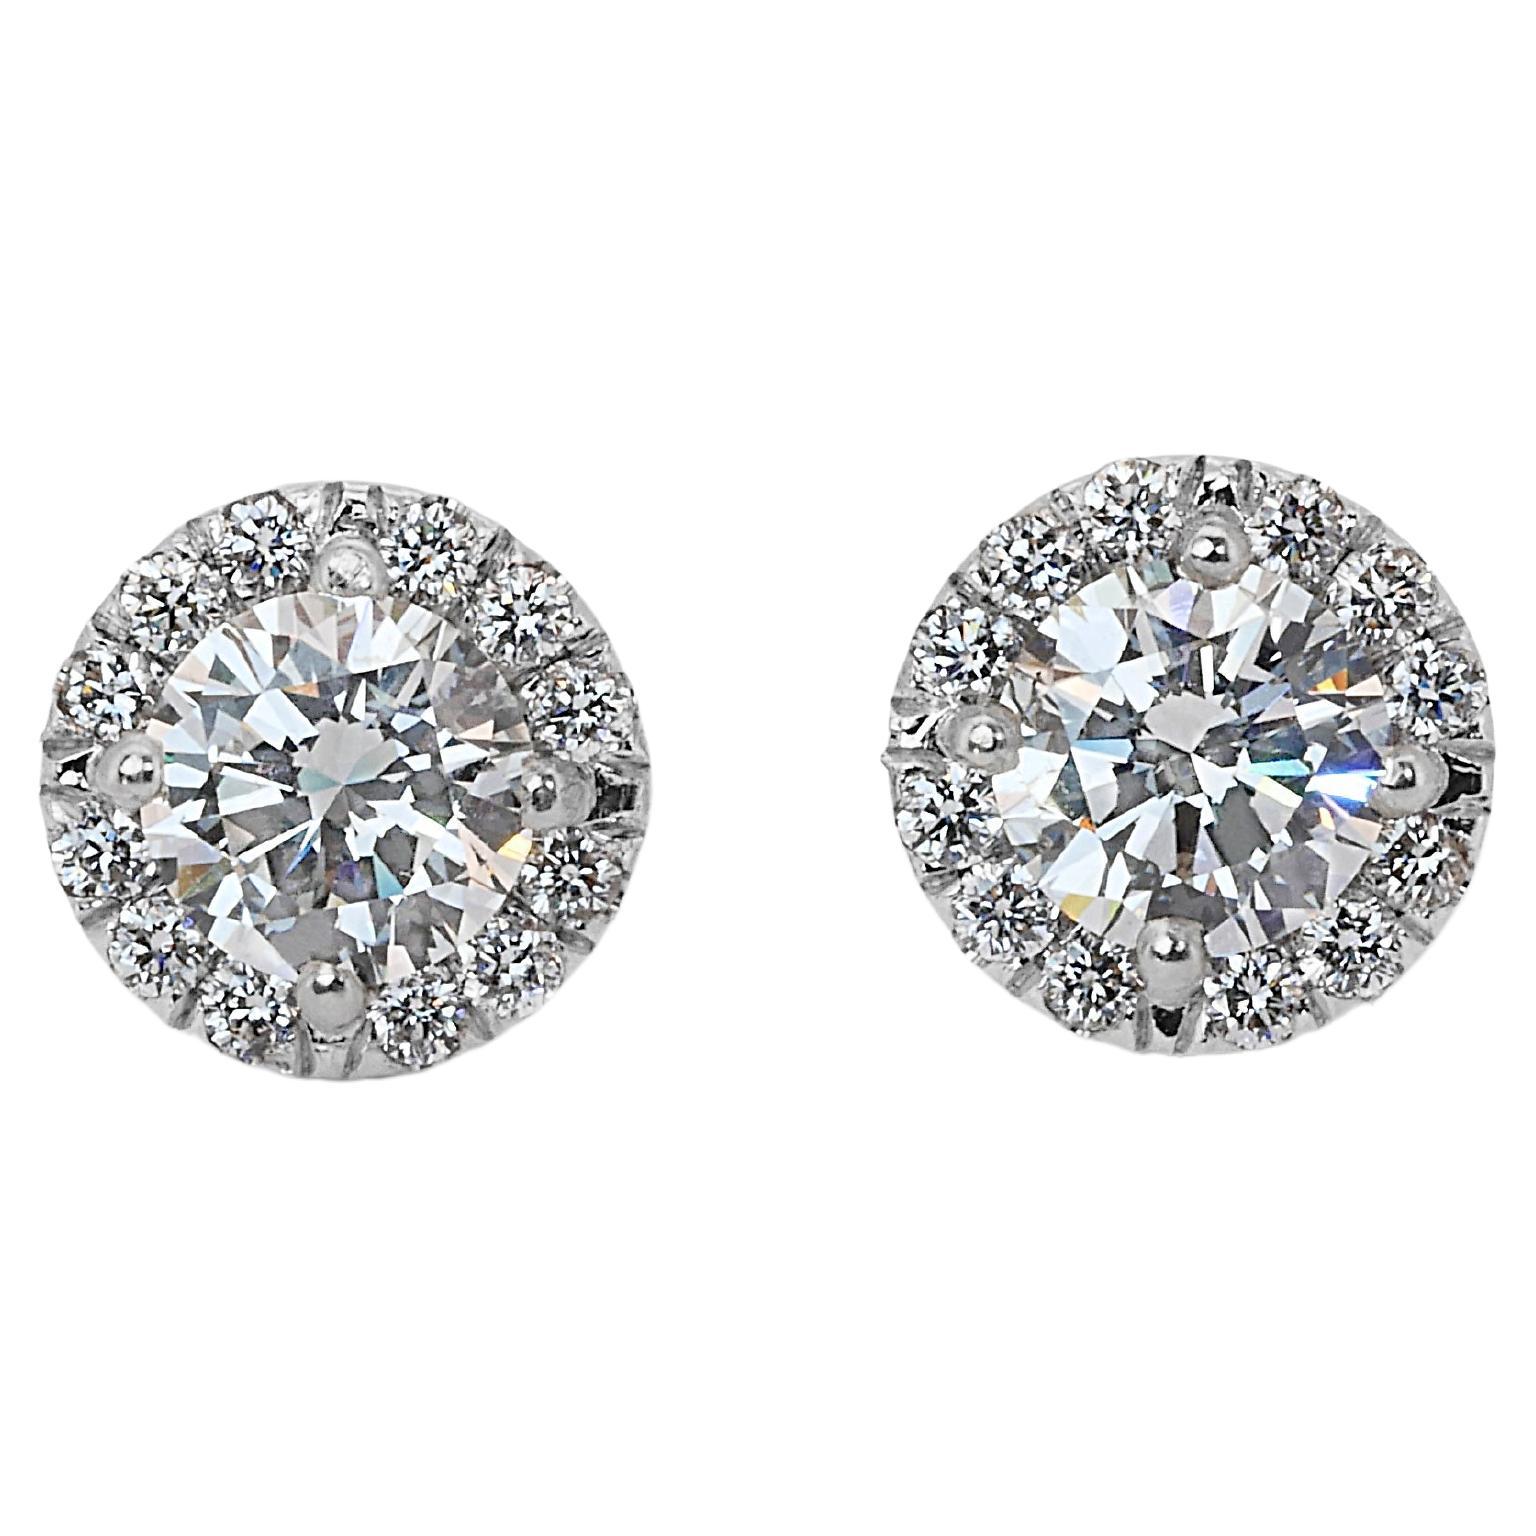 Lustrous 2.57ct Diamond Stud Earrings in 18k White Gold - GIA Certified For Sale